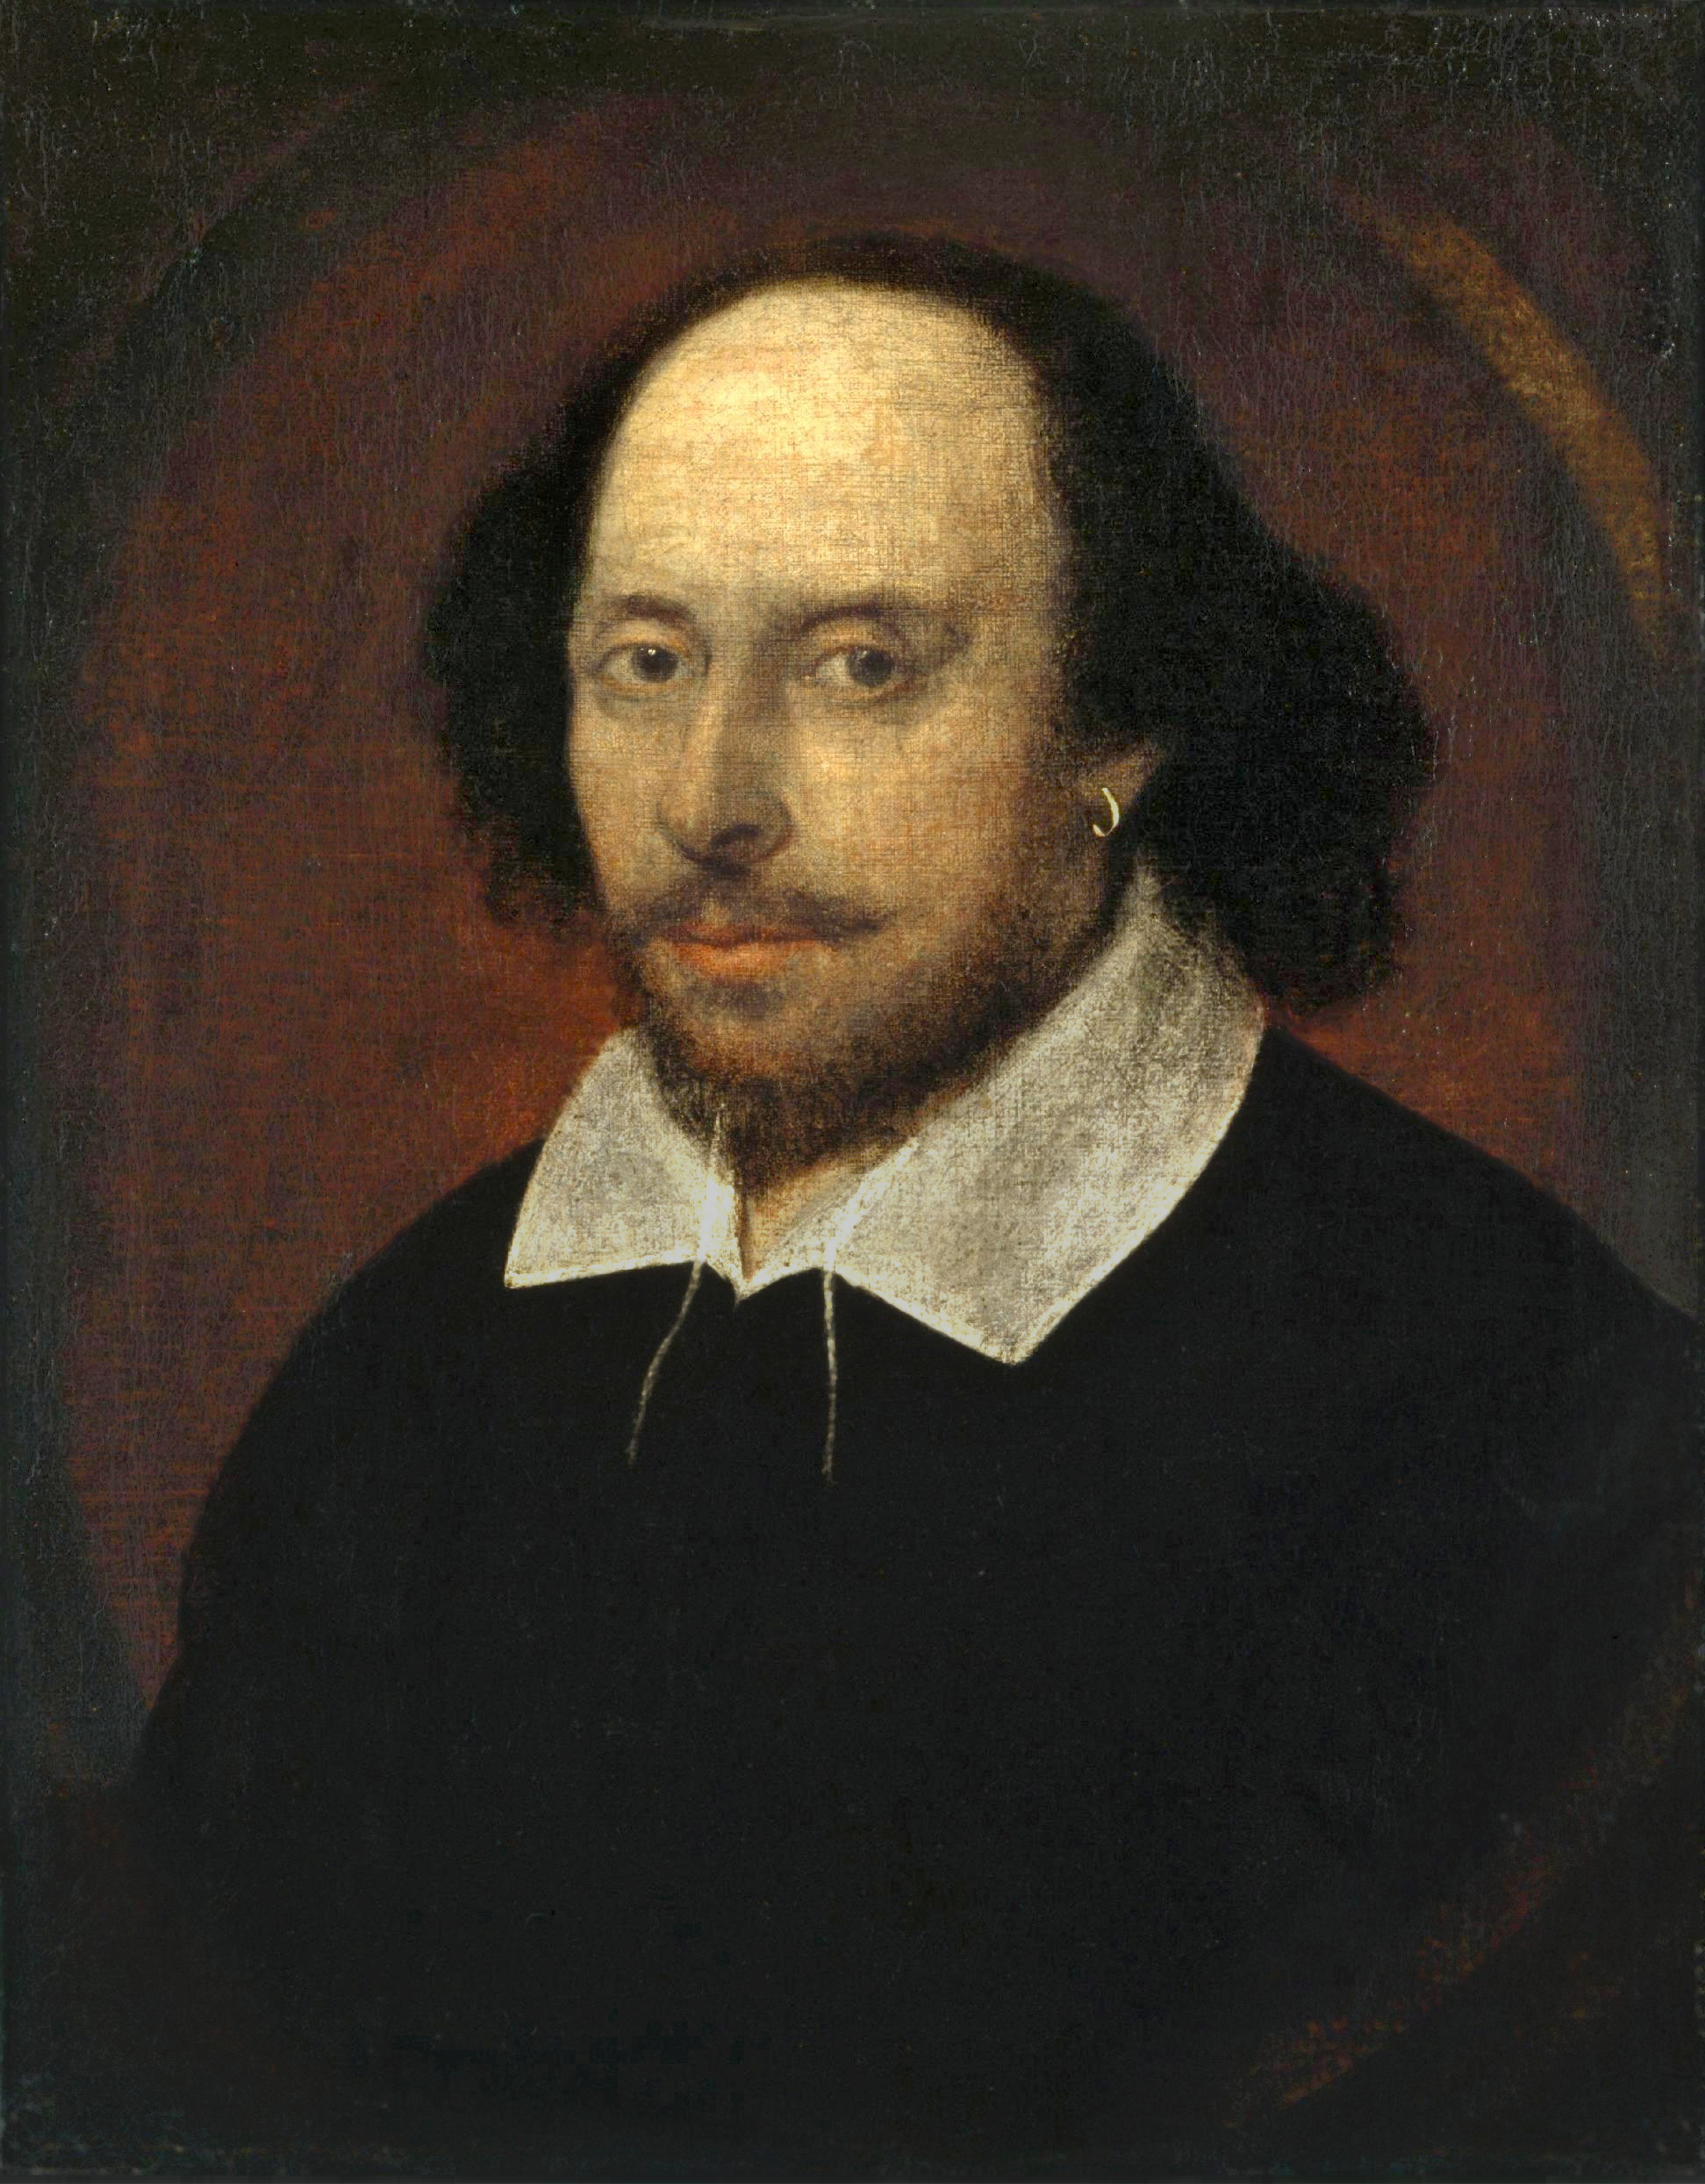 Did Shakespeare know he'd be 'Abridged'? (Painting: possibly by John Taylor, 1610, now in the National Portrait Gallery, London)